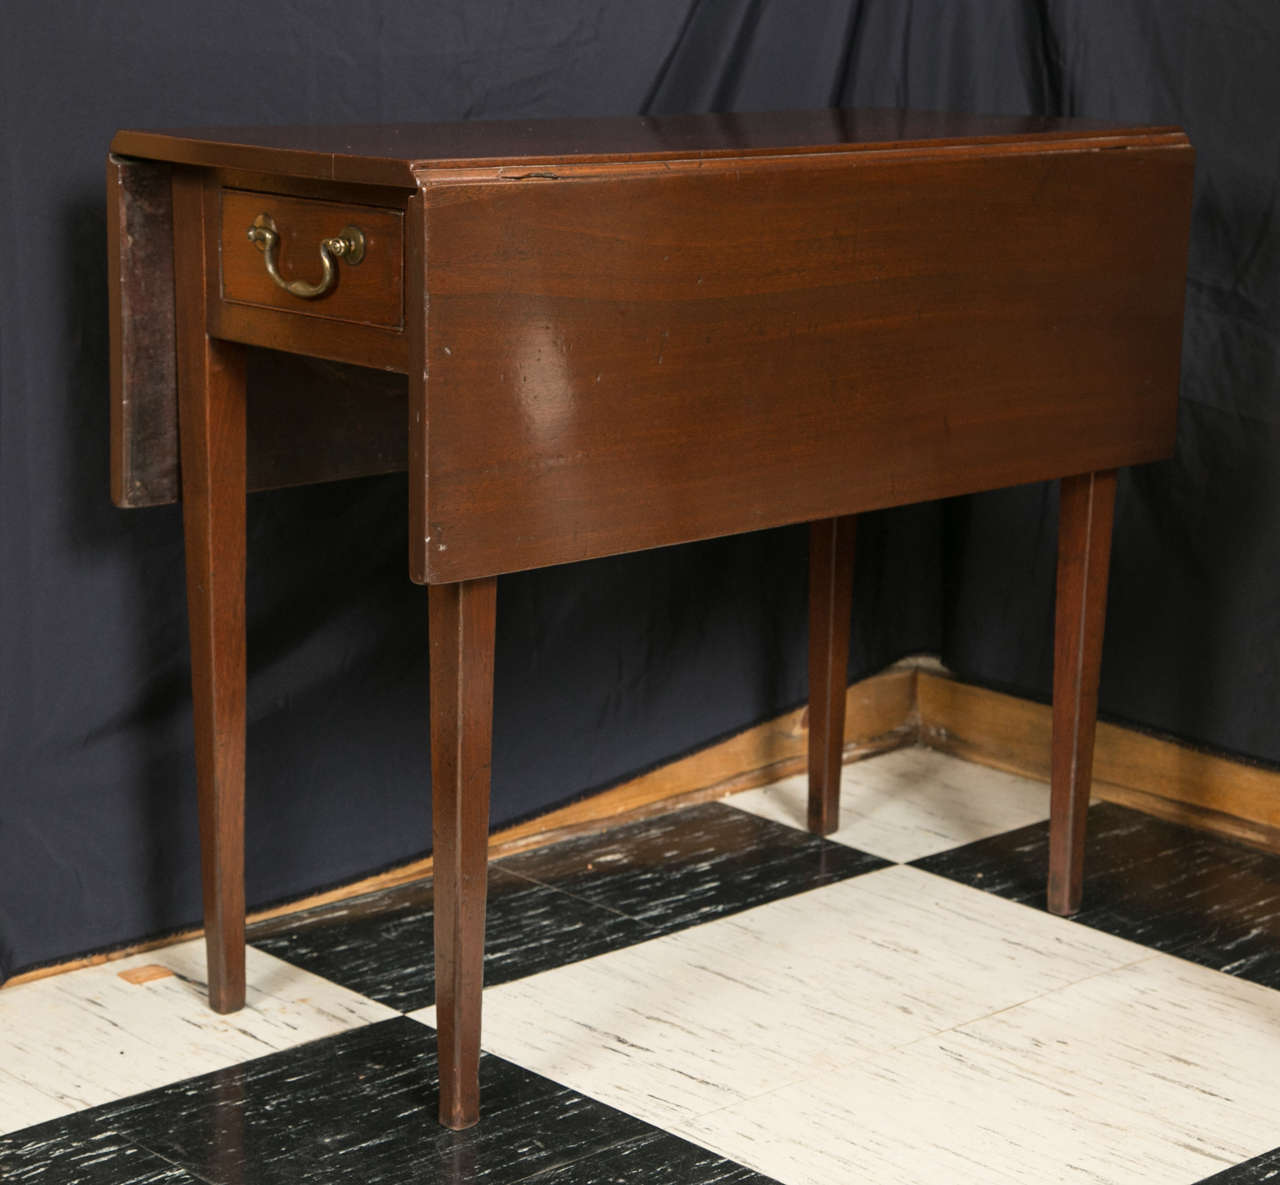 This solid walnut, swing-leg end table has great proportions and would look as well behind a loveseat as it would next to it. Measures: With both 10.75” leaves up, it opens to a near-square 34” x 35.5” and a functional drawer at each end adds